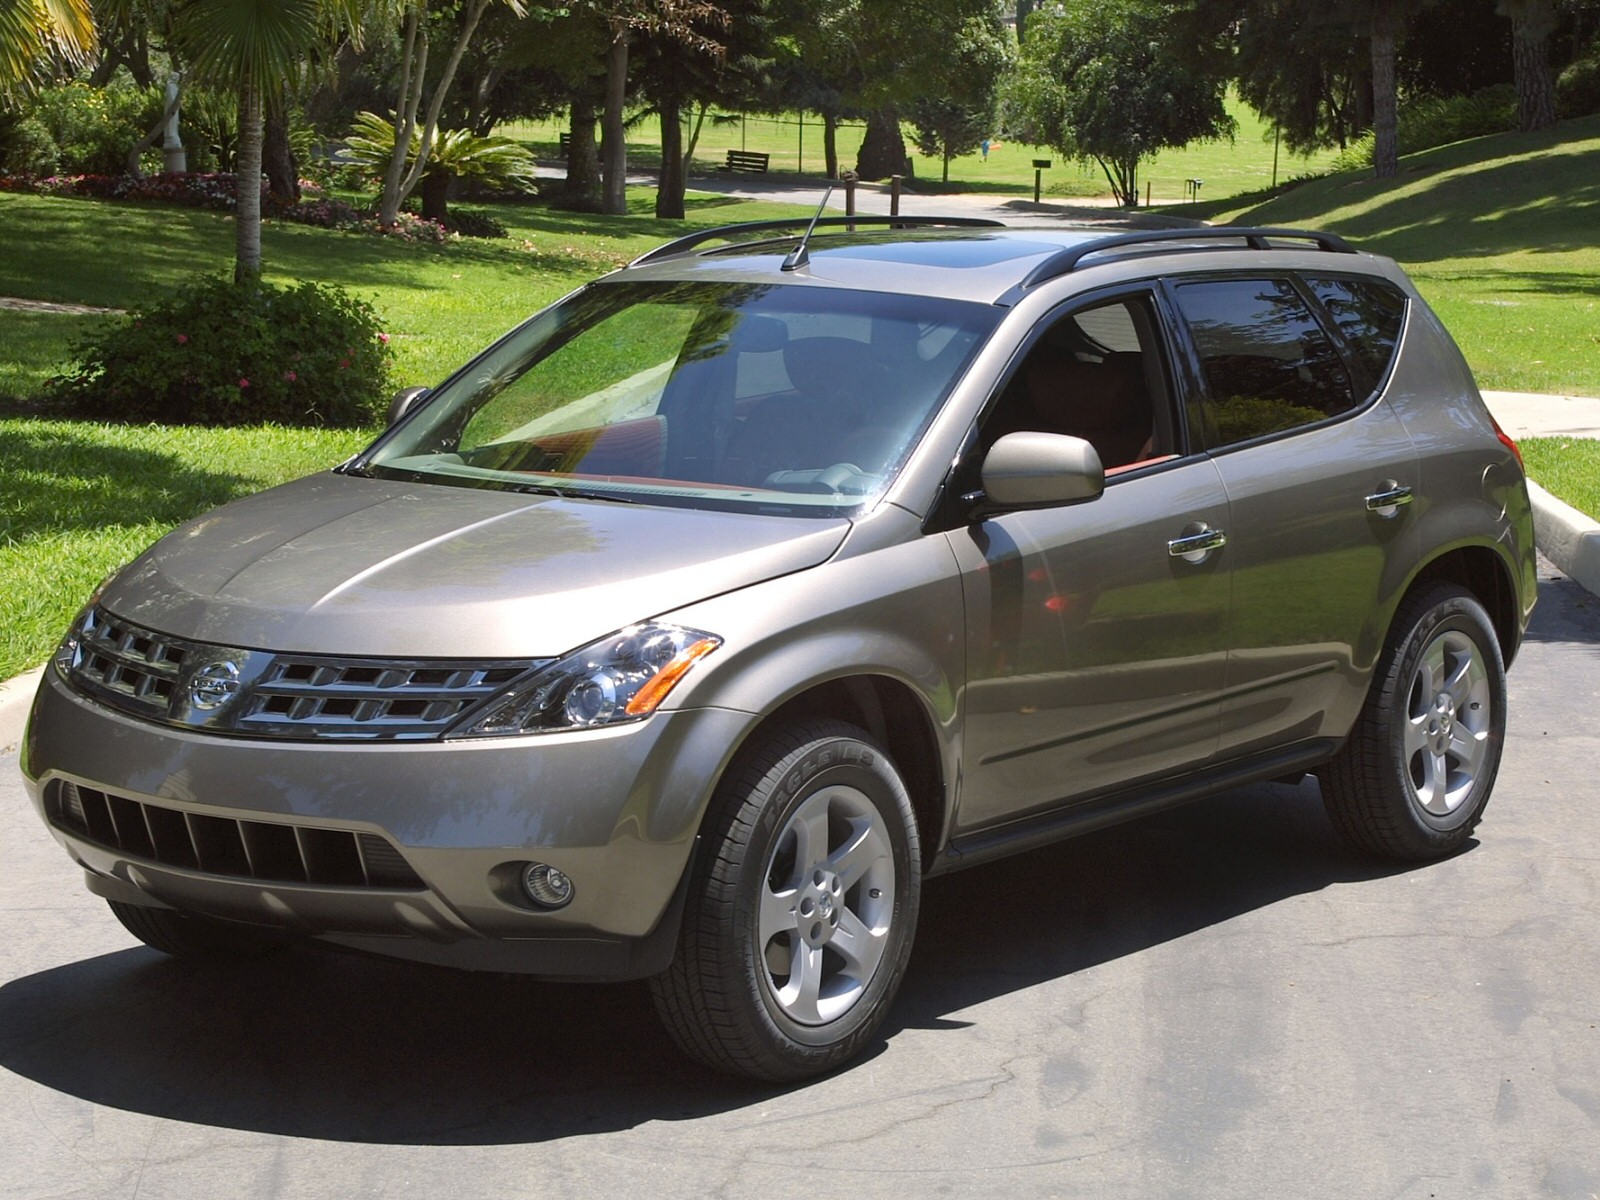 2006 Nissan murano transmission issues #5